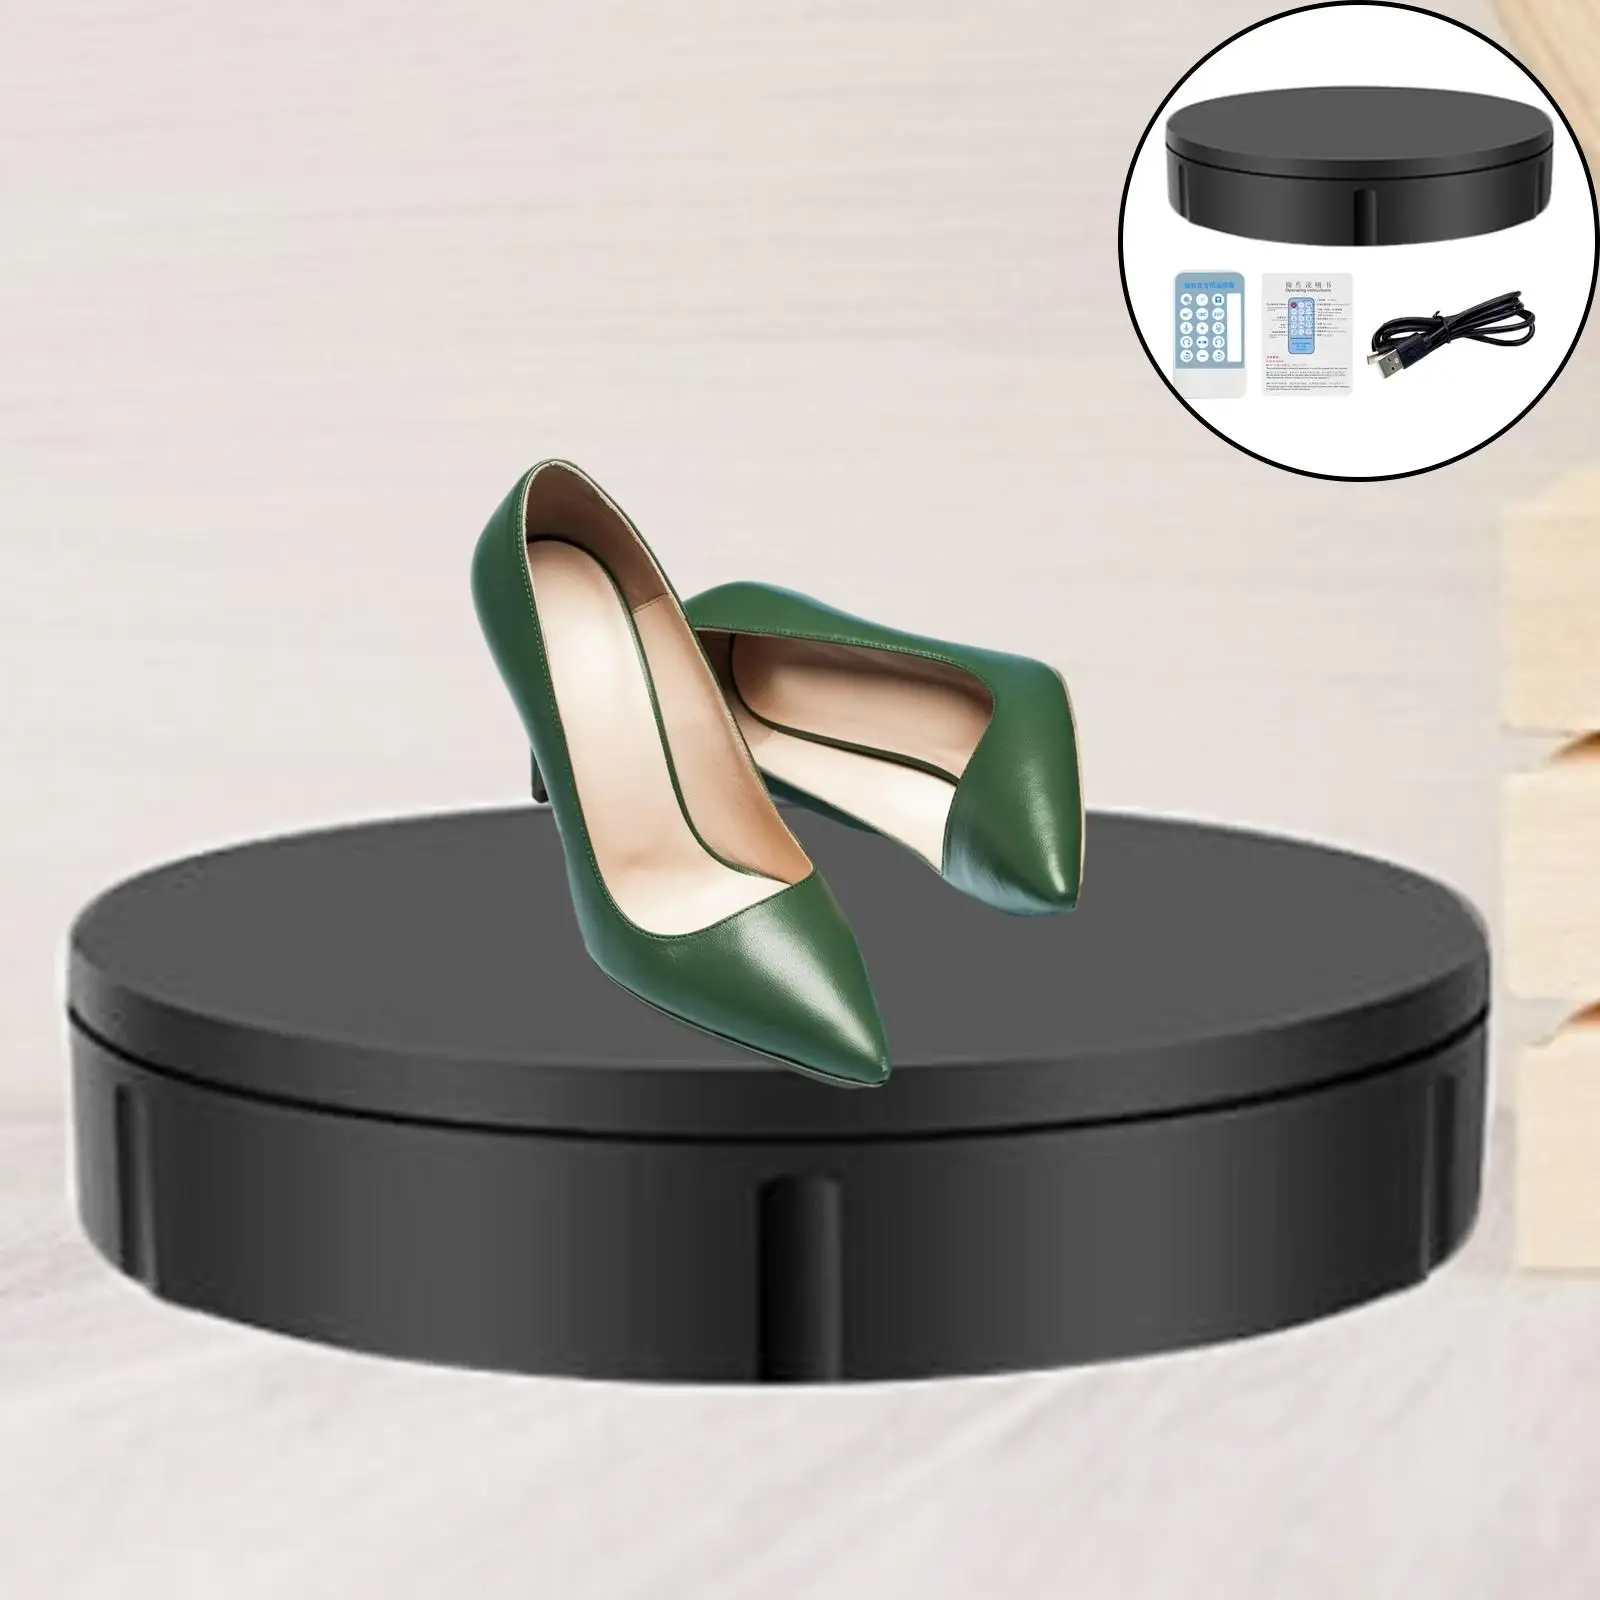 Rotating Display Stand,360 Degree Turntable Jewelry Holder for Shooting Jewelry Cake Shop Display